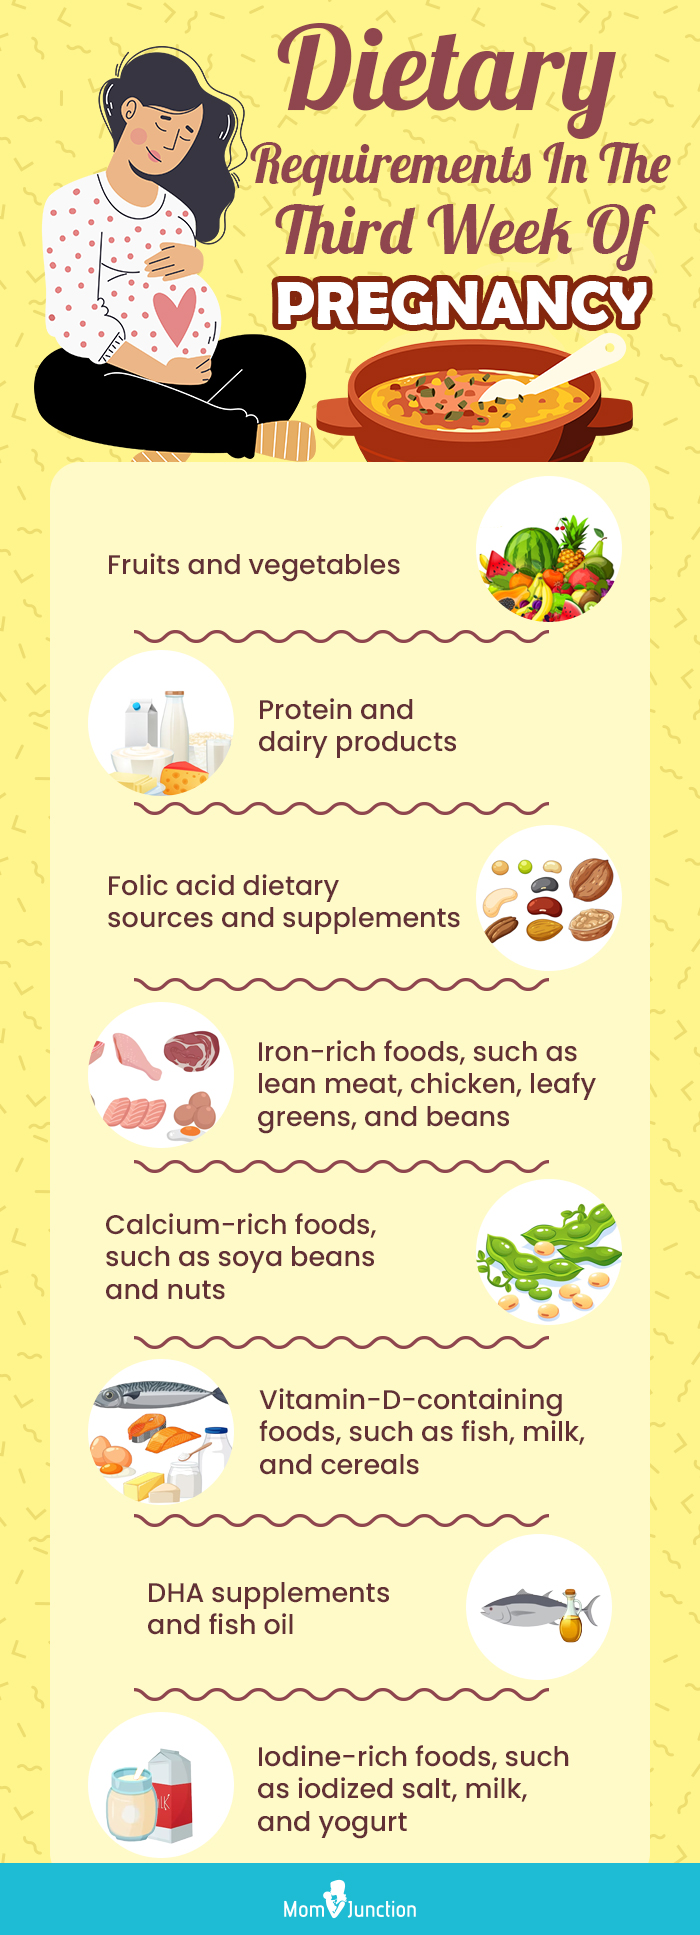 dietary requirements in the third week of pregnancy (infographic)